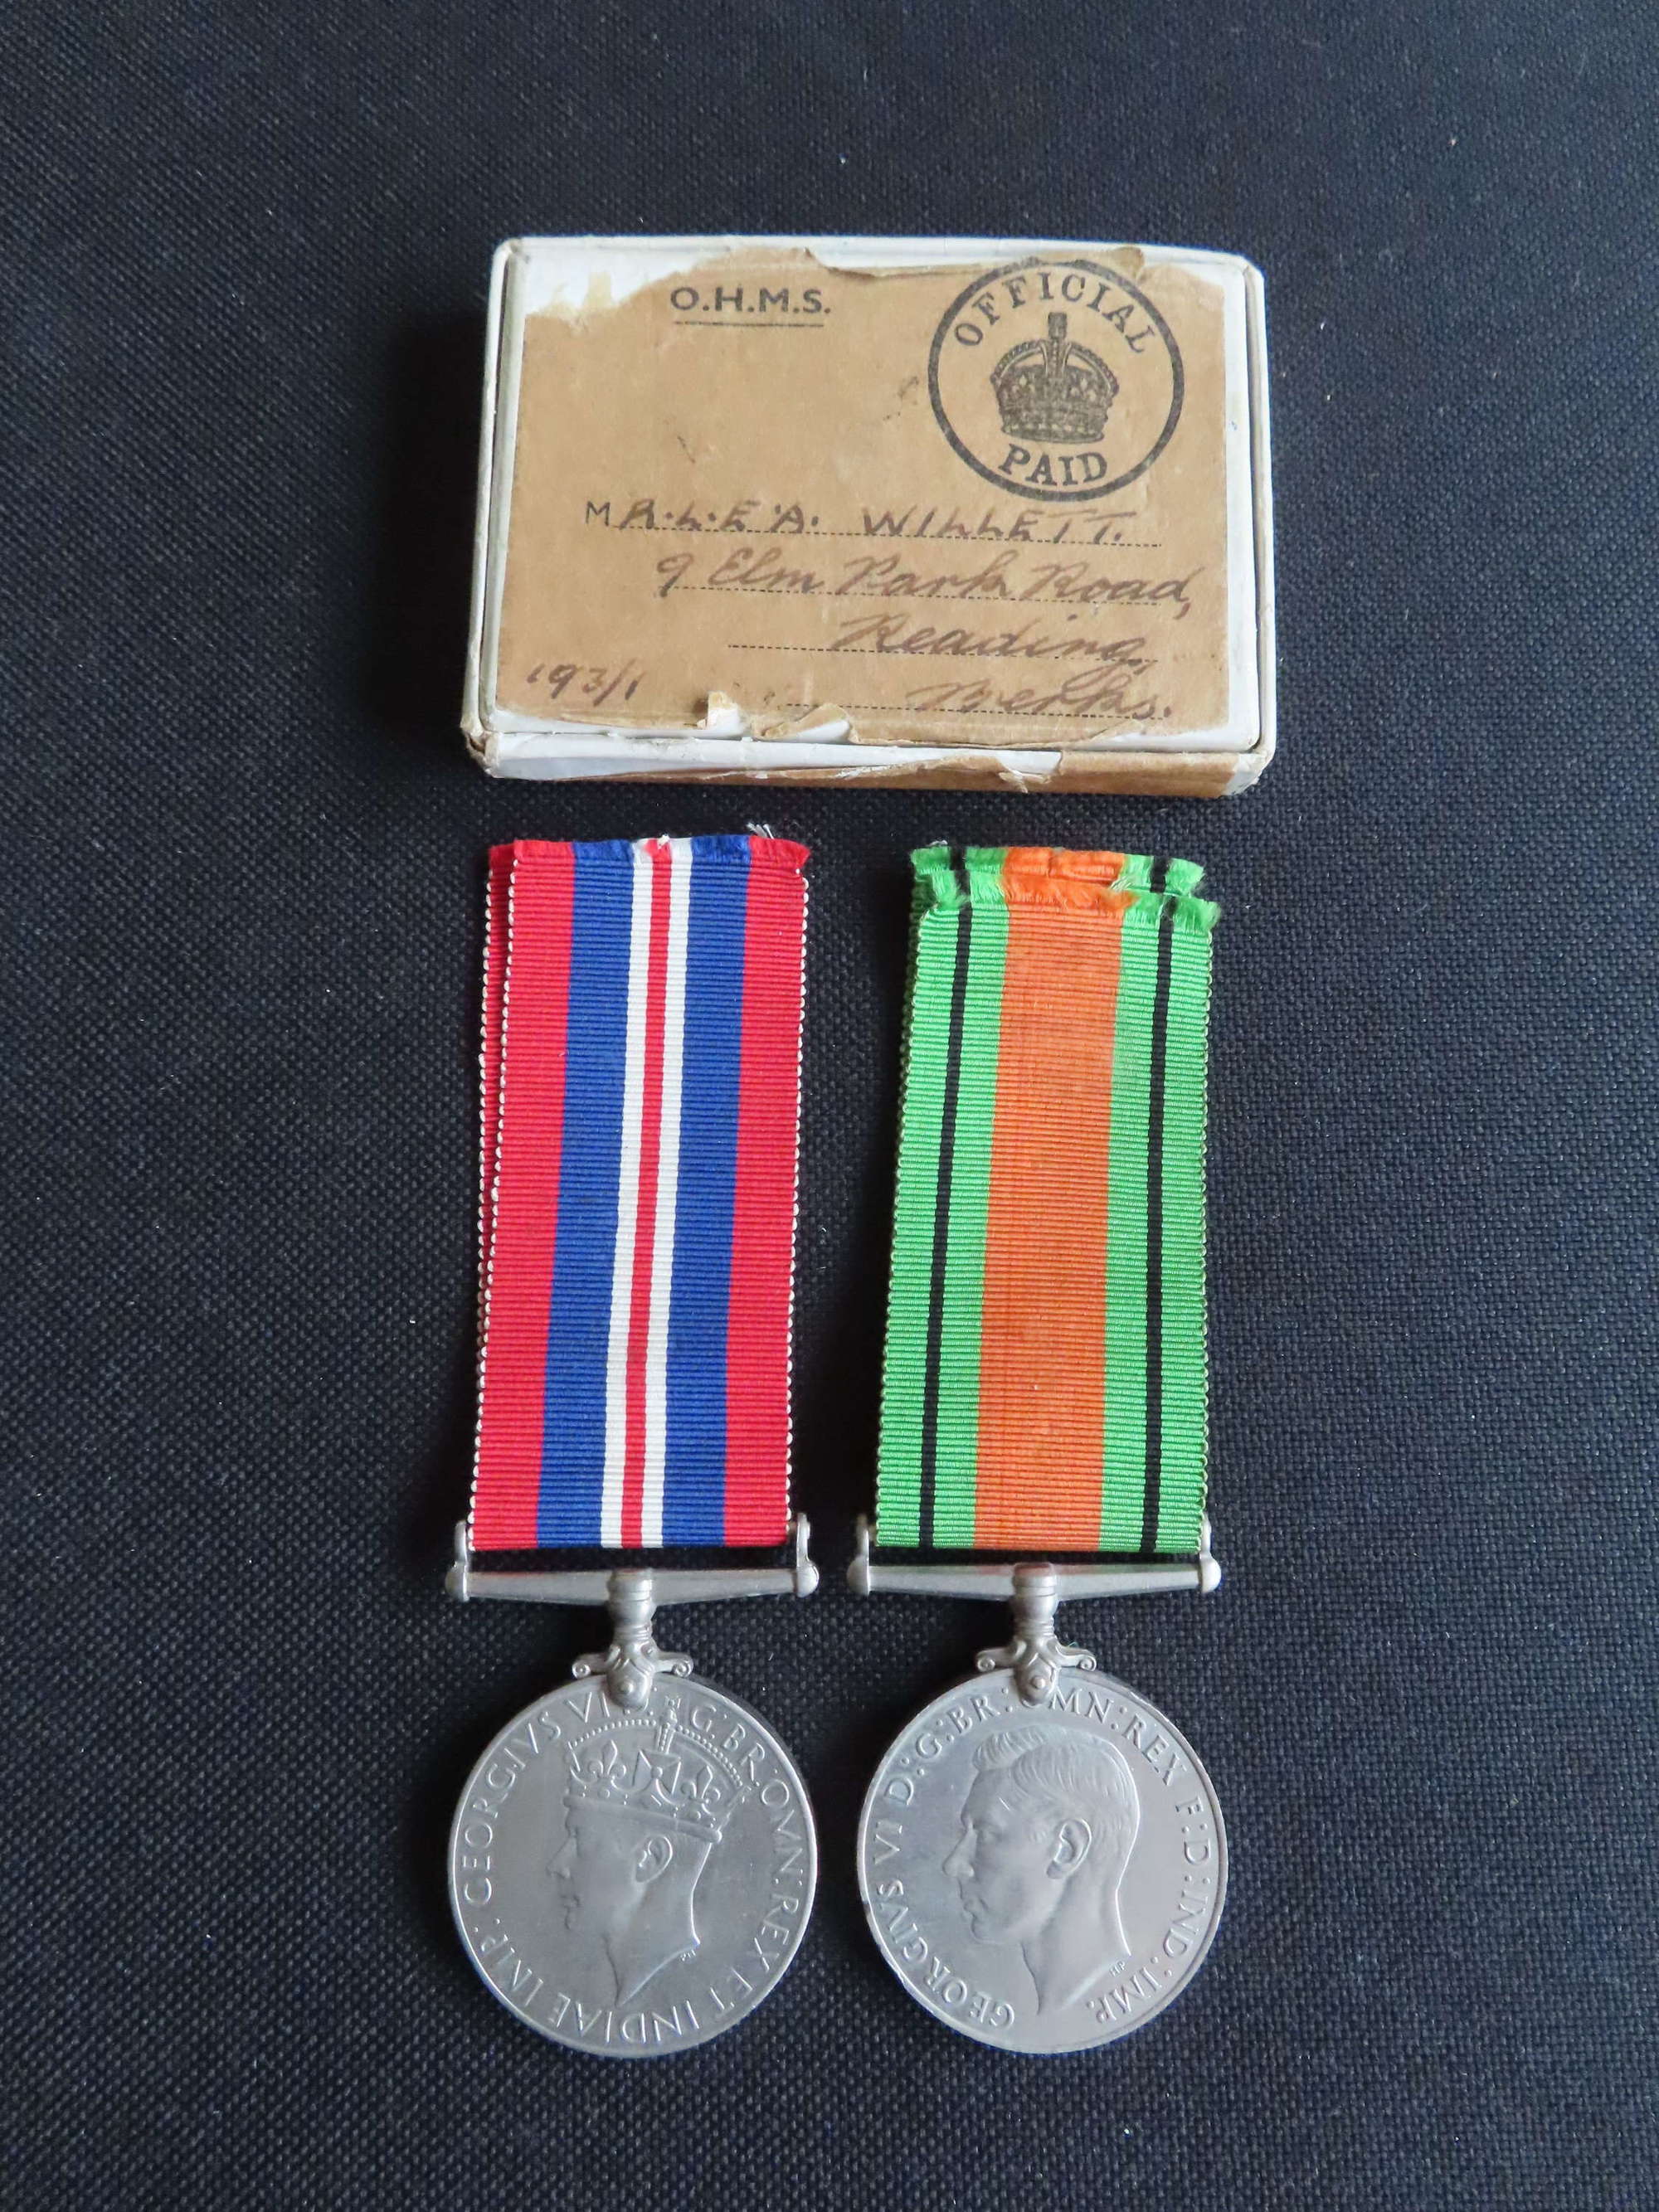 WW2 Boxed Medals awarded to Mr L E A Willett from Reading, Berkshire